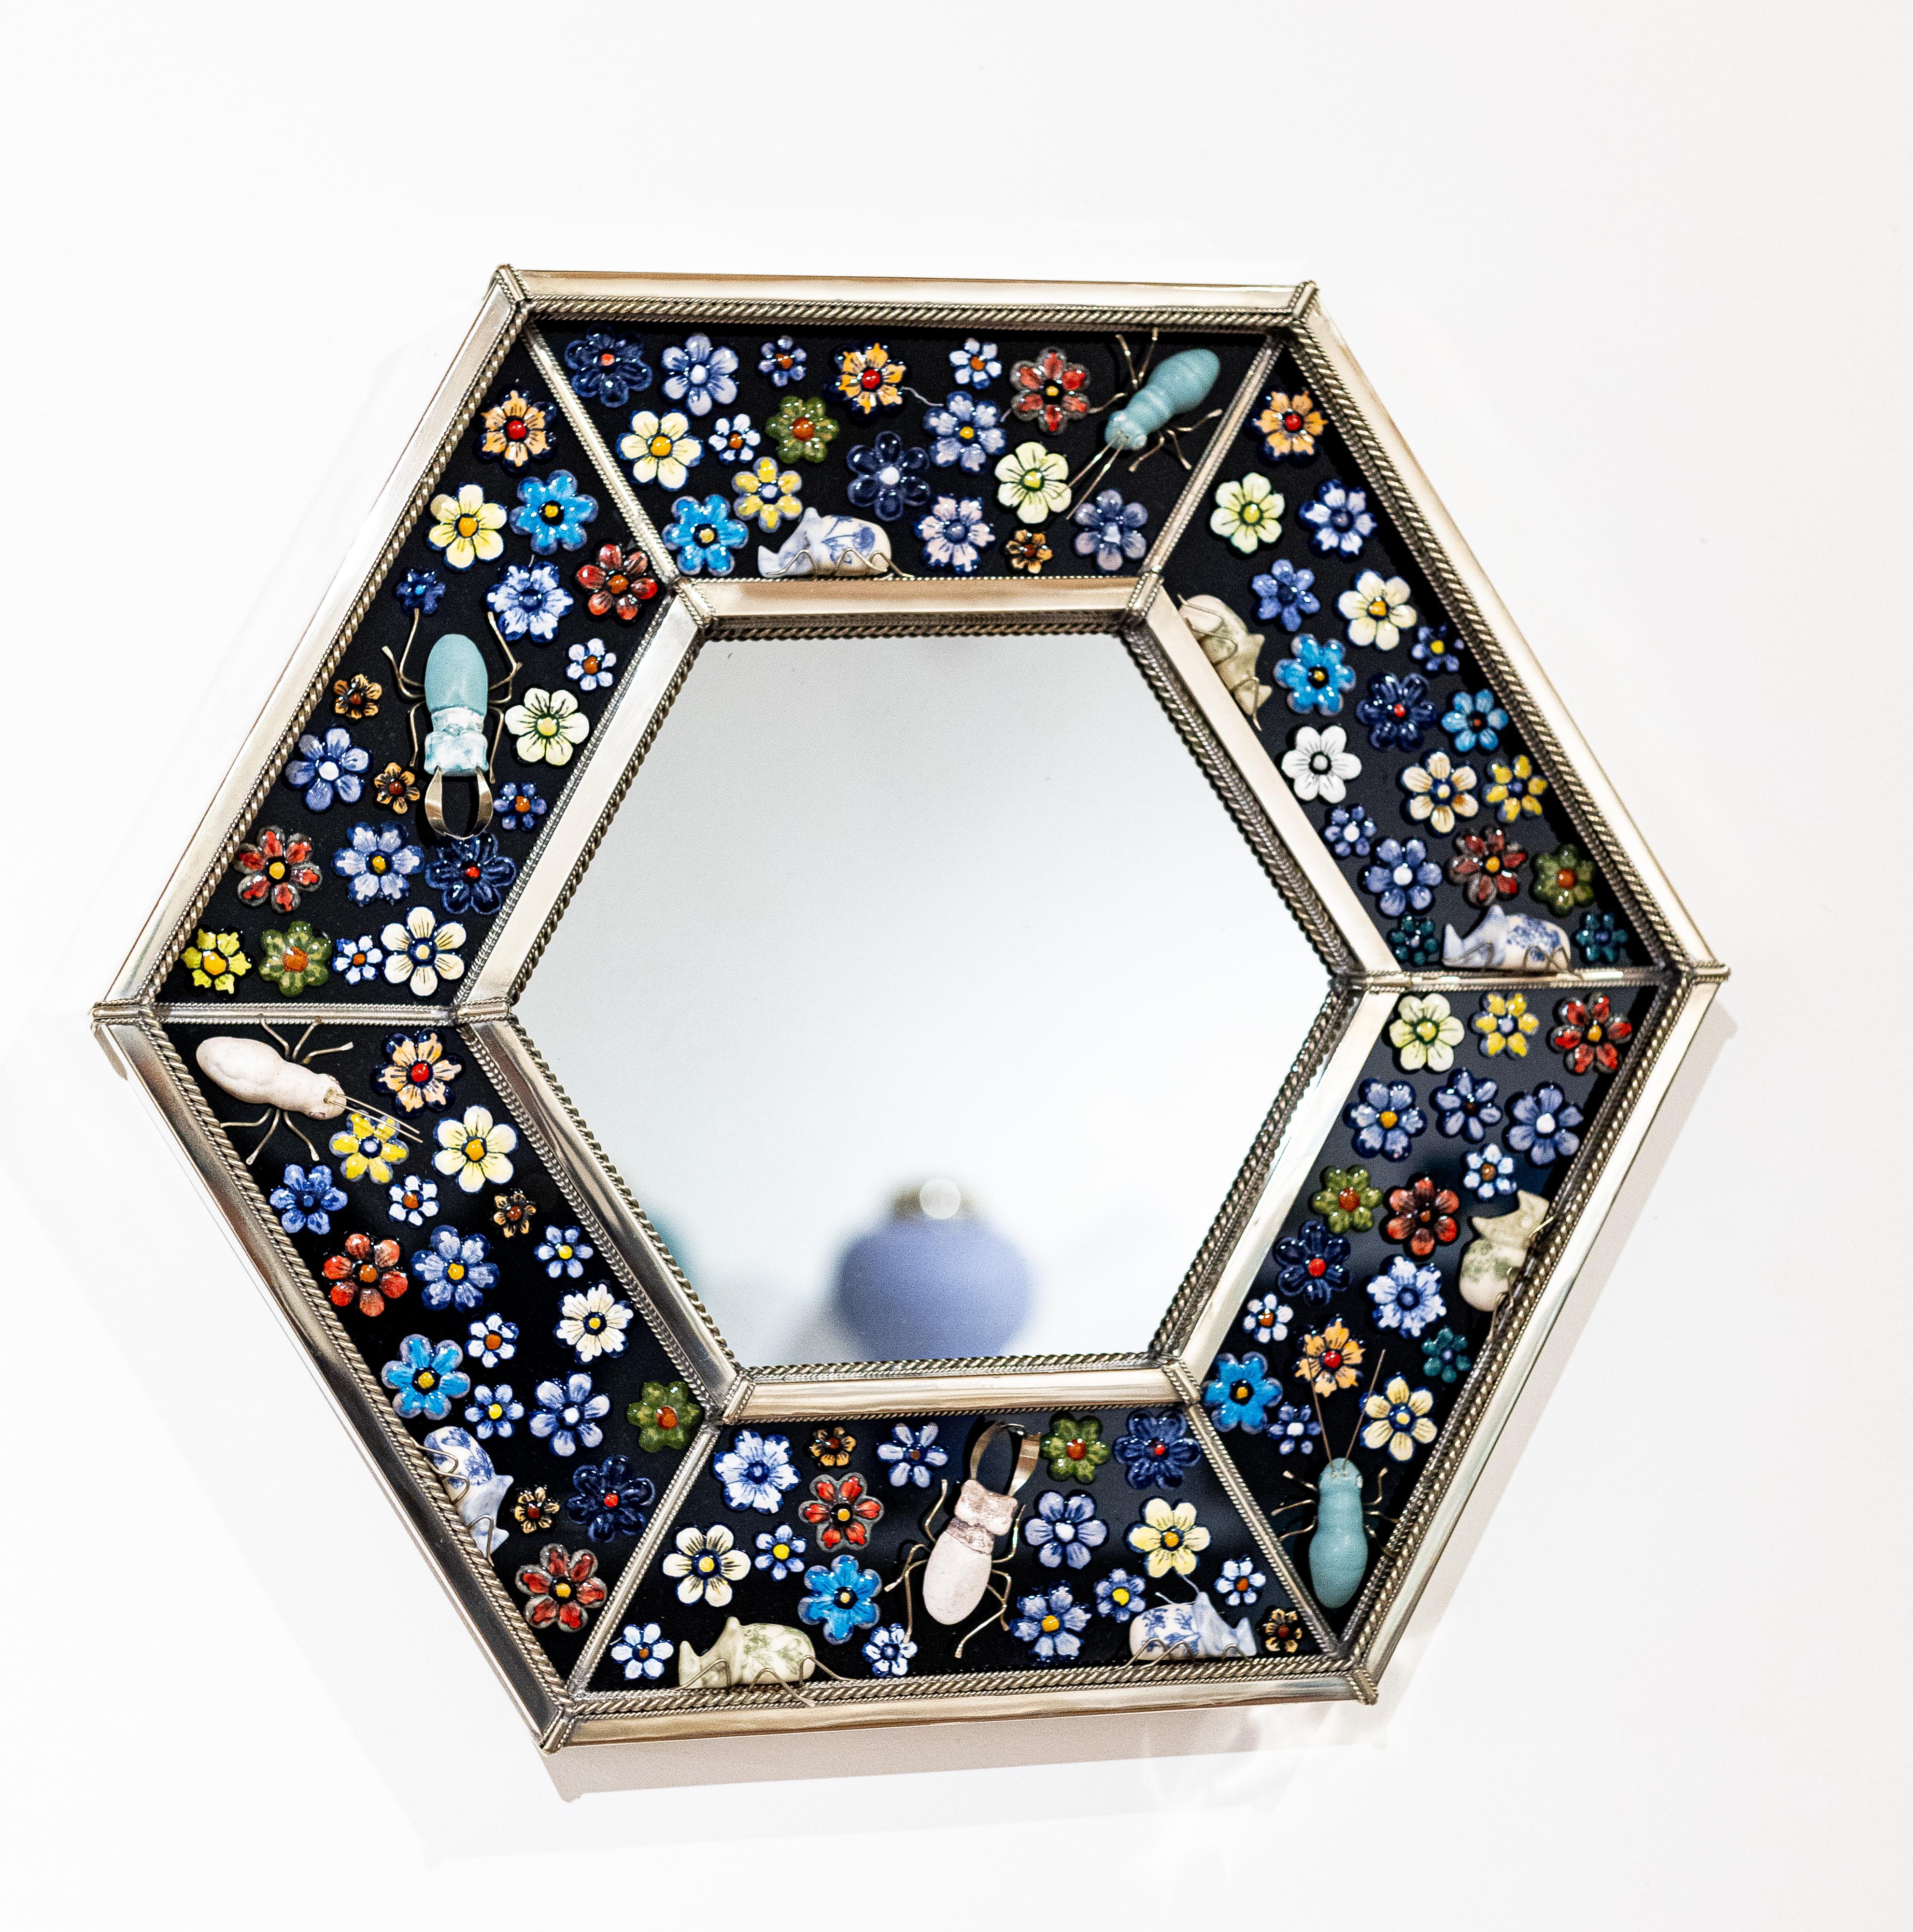 Contemporary Hexagonal Mirror, Hand Painted Ceramic Flowers and Insects over White Metal